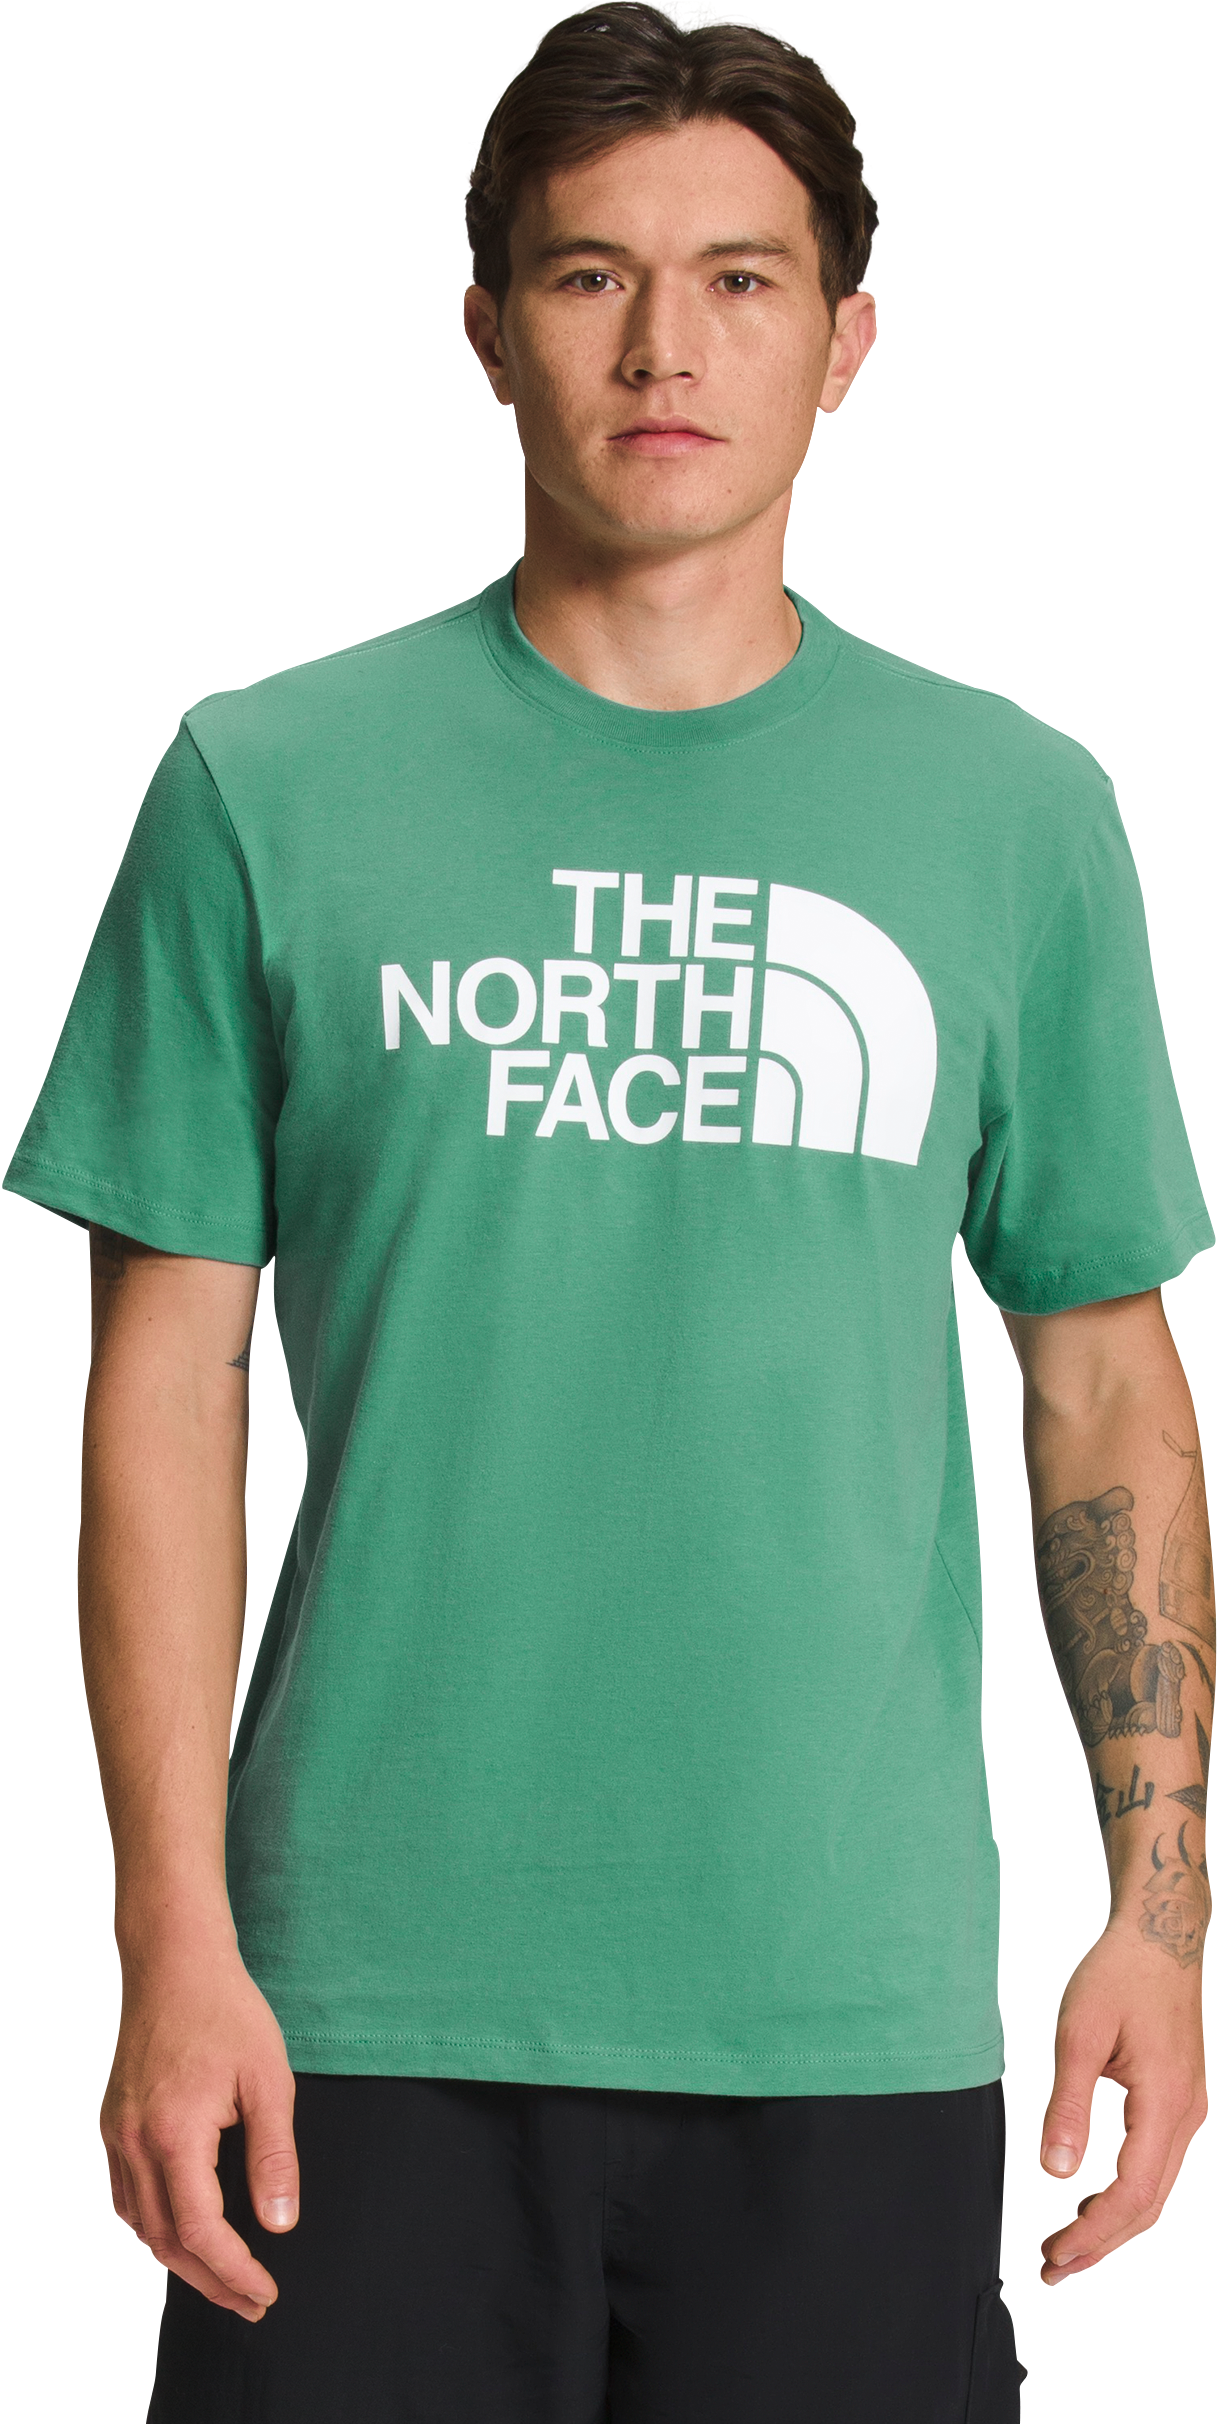 The North Face Half Dome Short-Sleeve T-Shirt for Men - Deep Grass Green - L